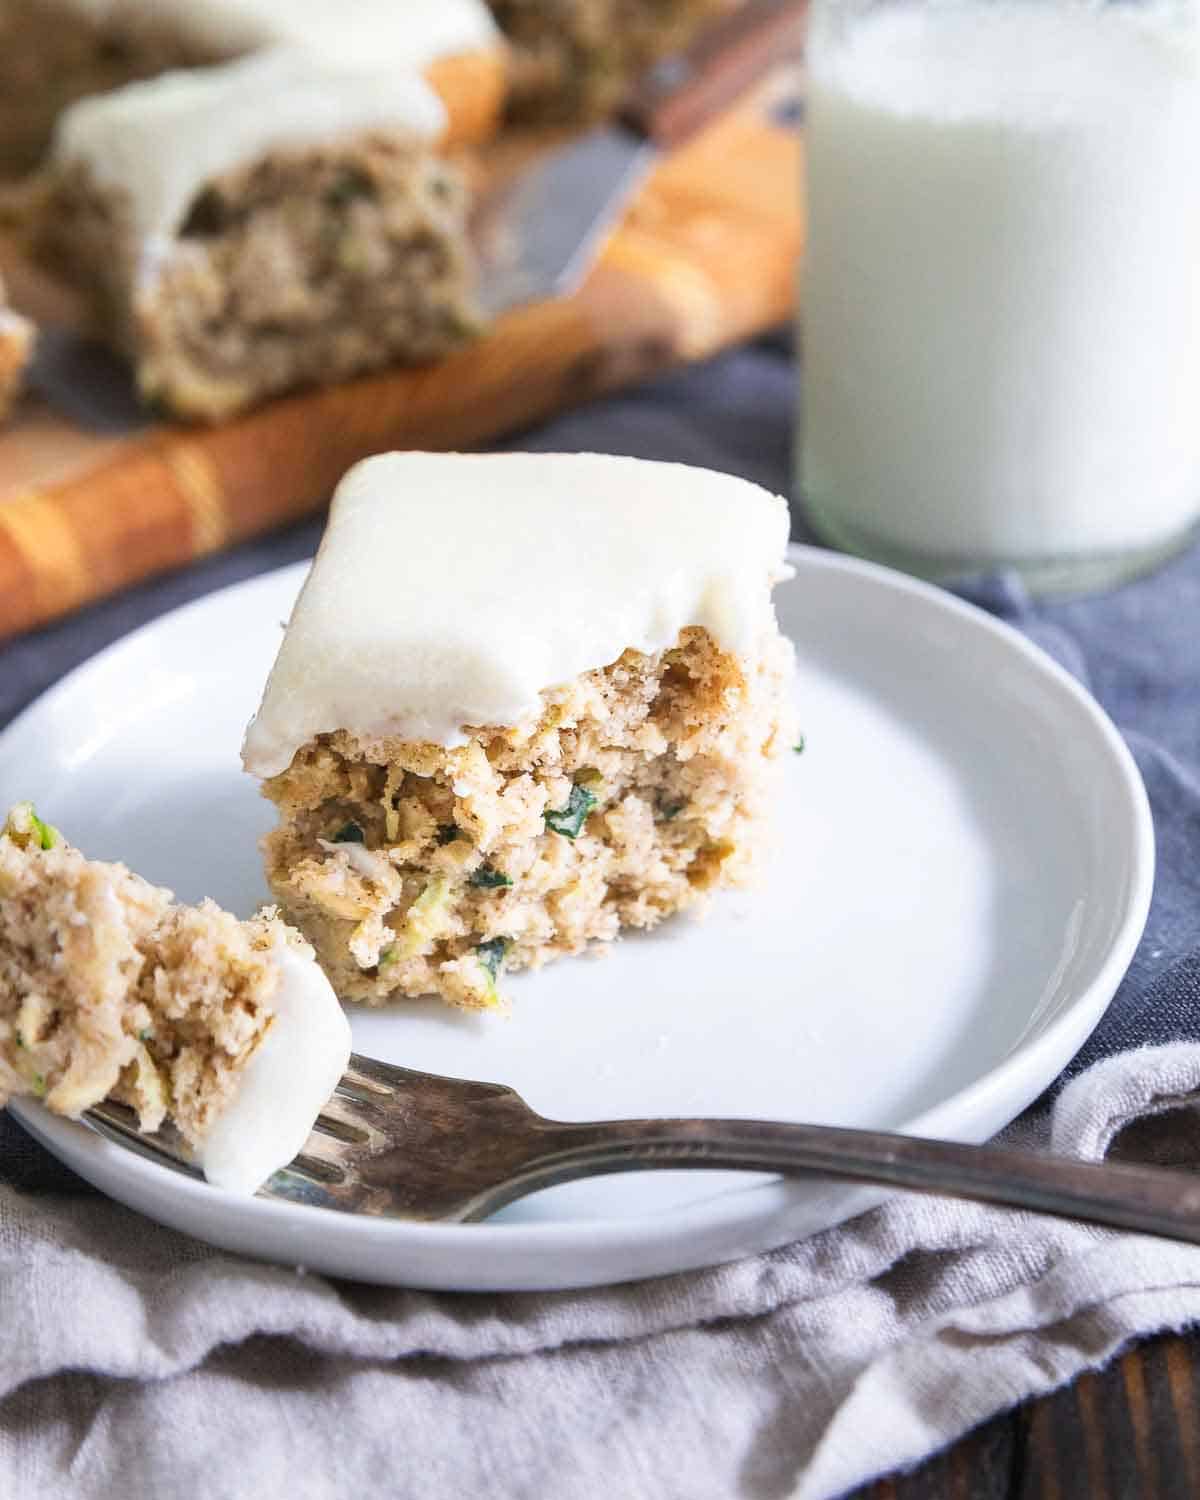 A moist, delicious crumb texture filled with spices and a sweet cream cheese frosting make this the best zucchini bar recipe!